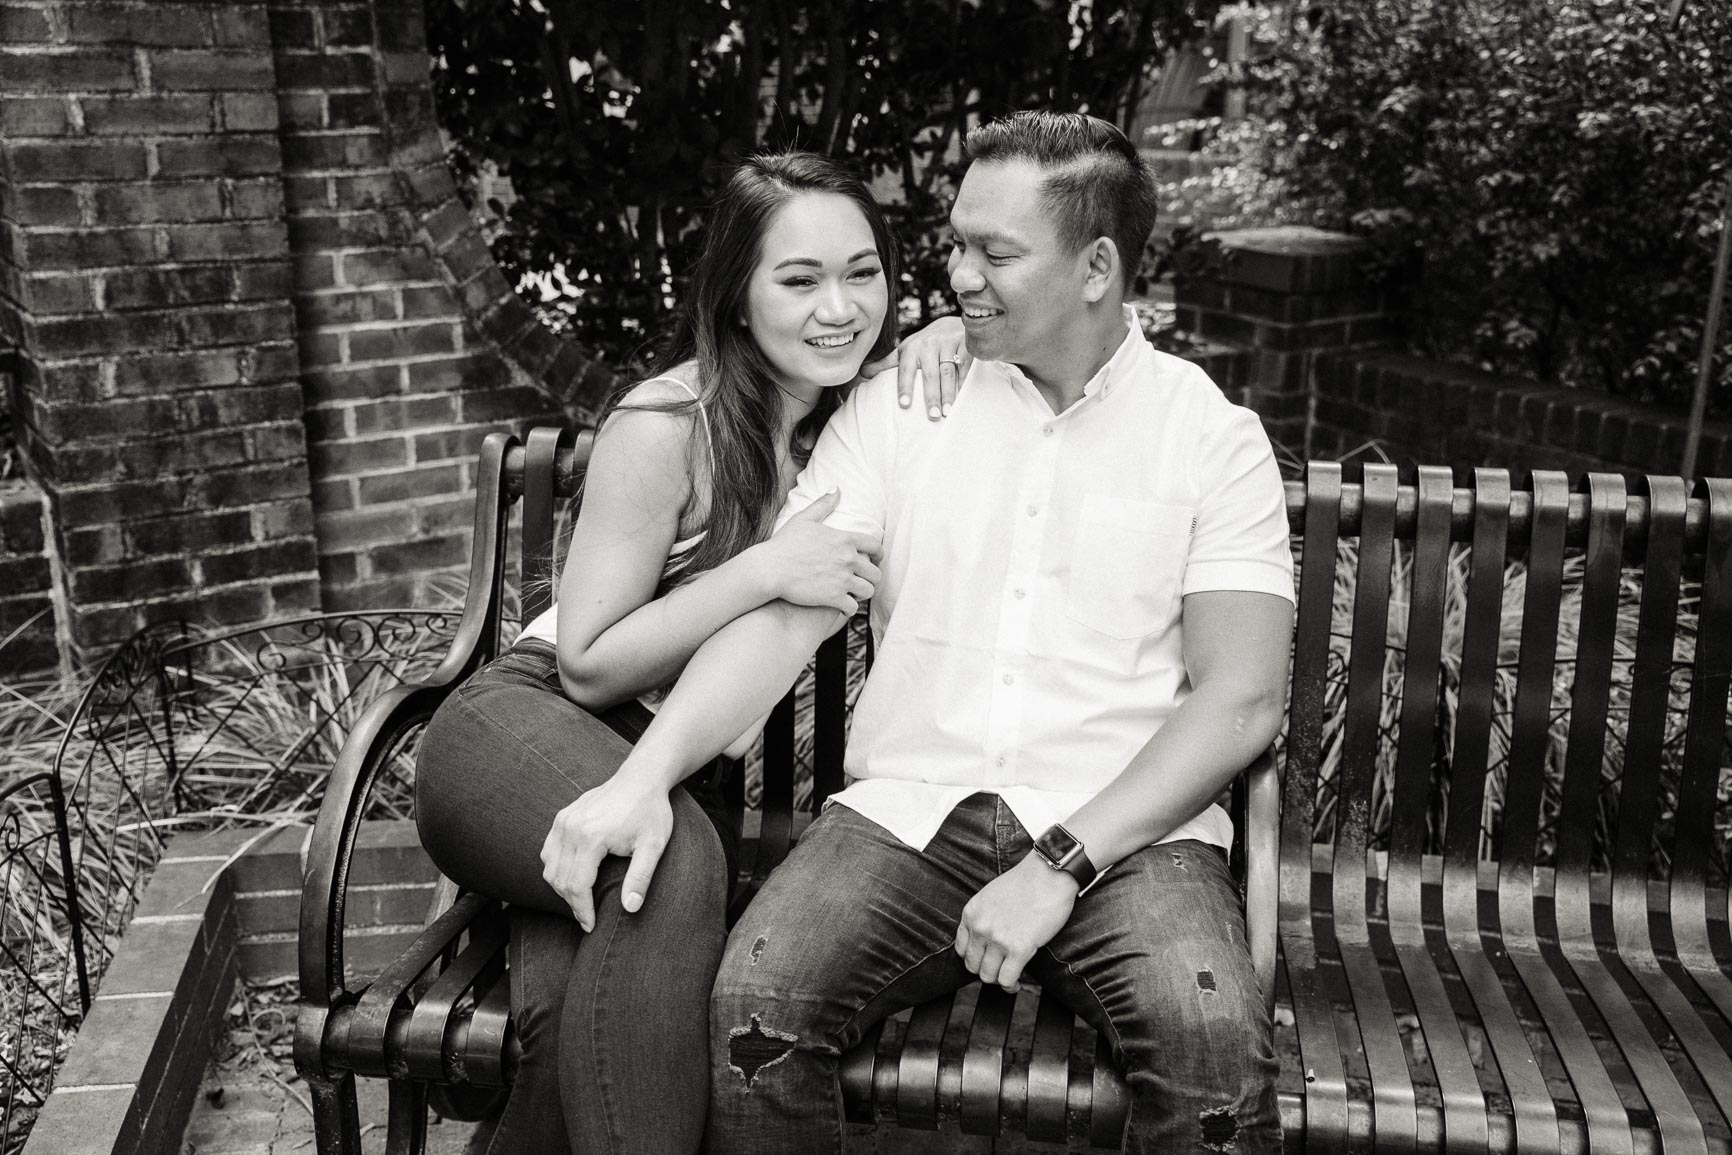 Charlotte Fourth Ward district engagement session shot by Nhieu Tang Photography|nhieutang.com